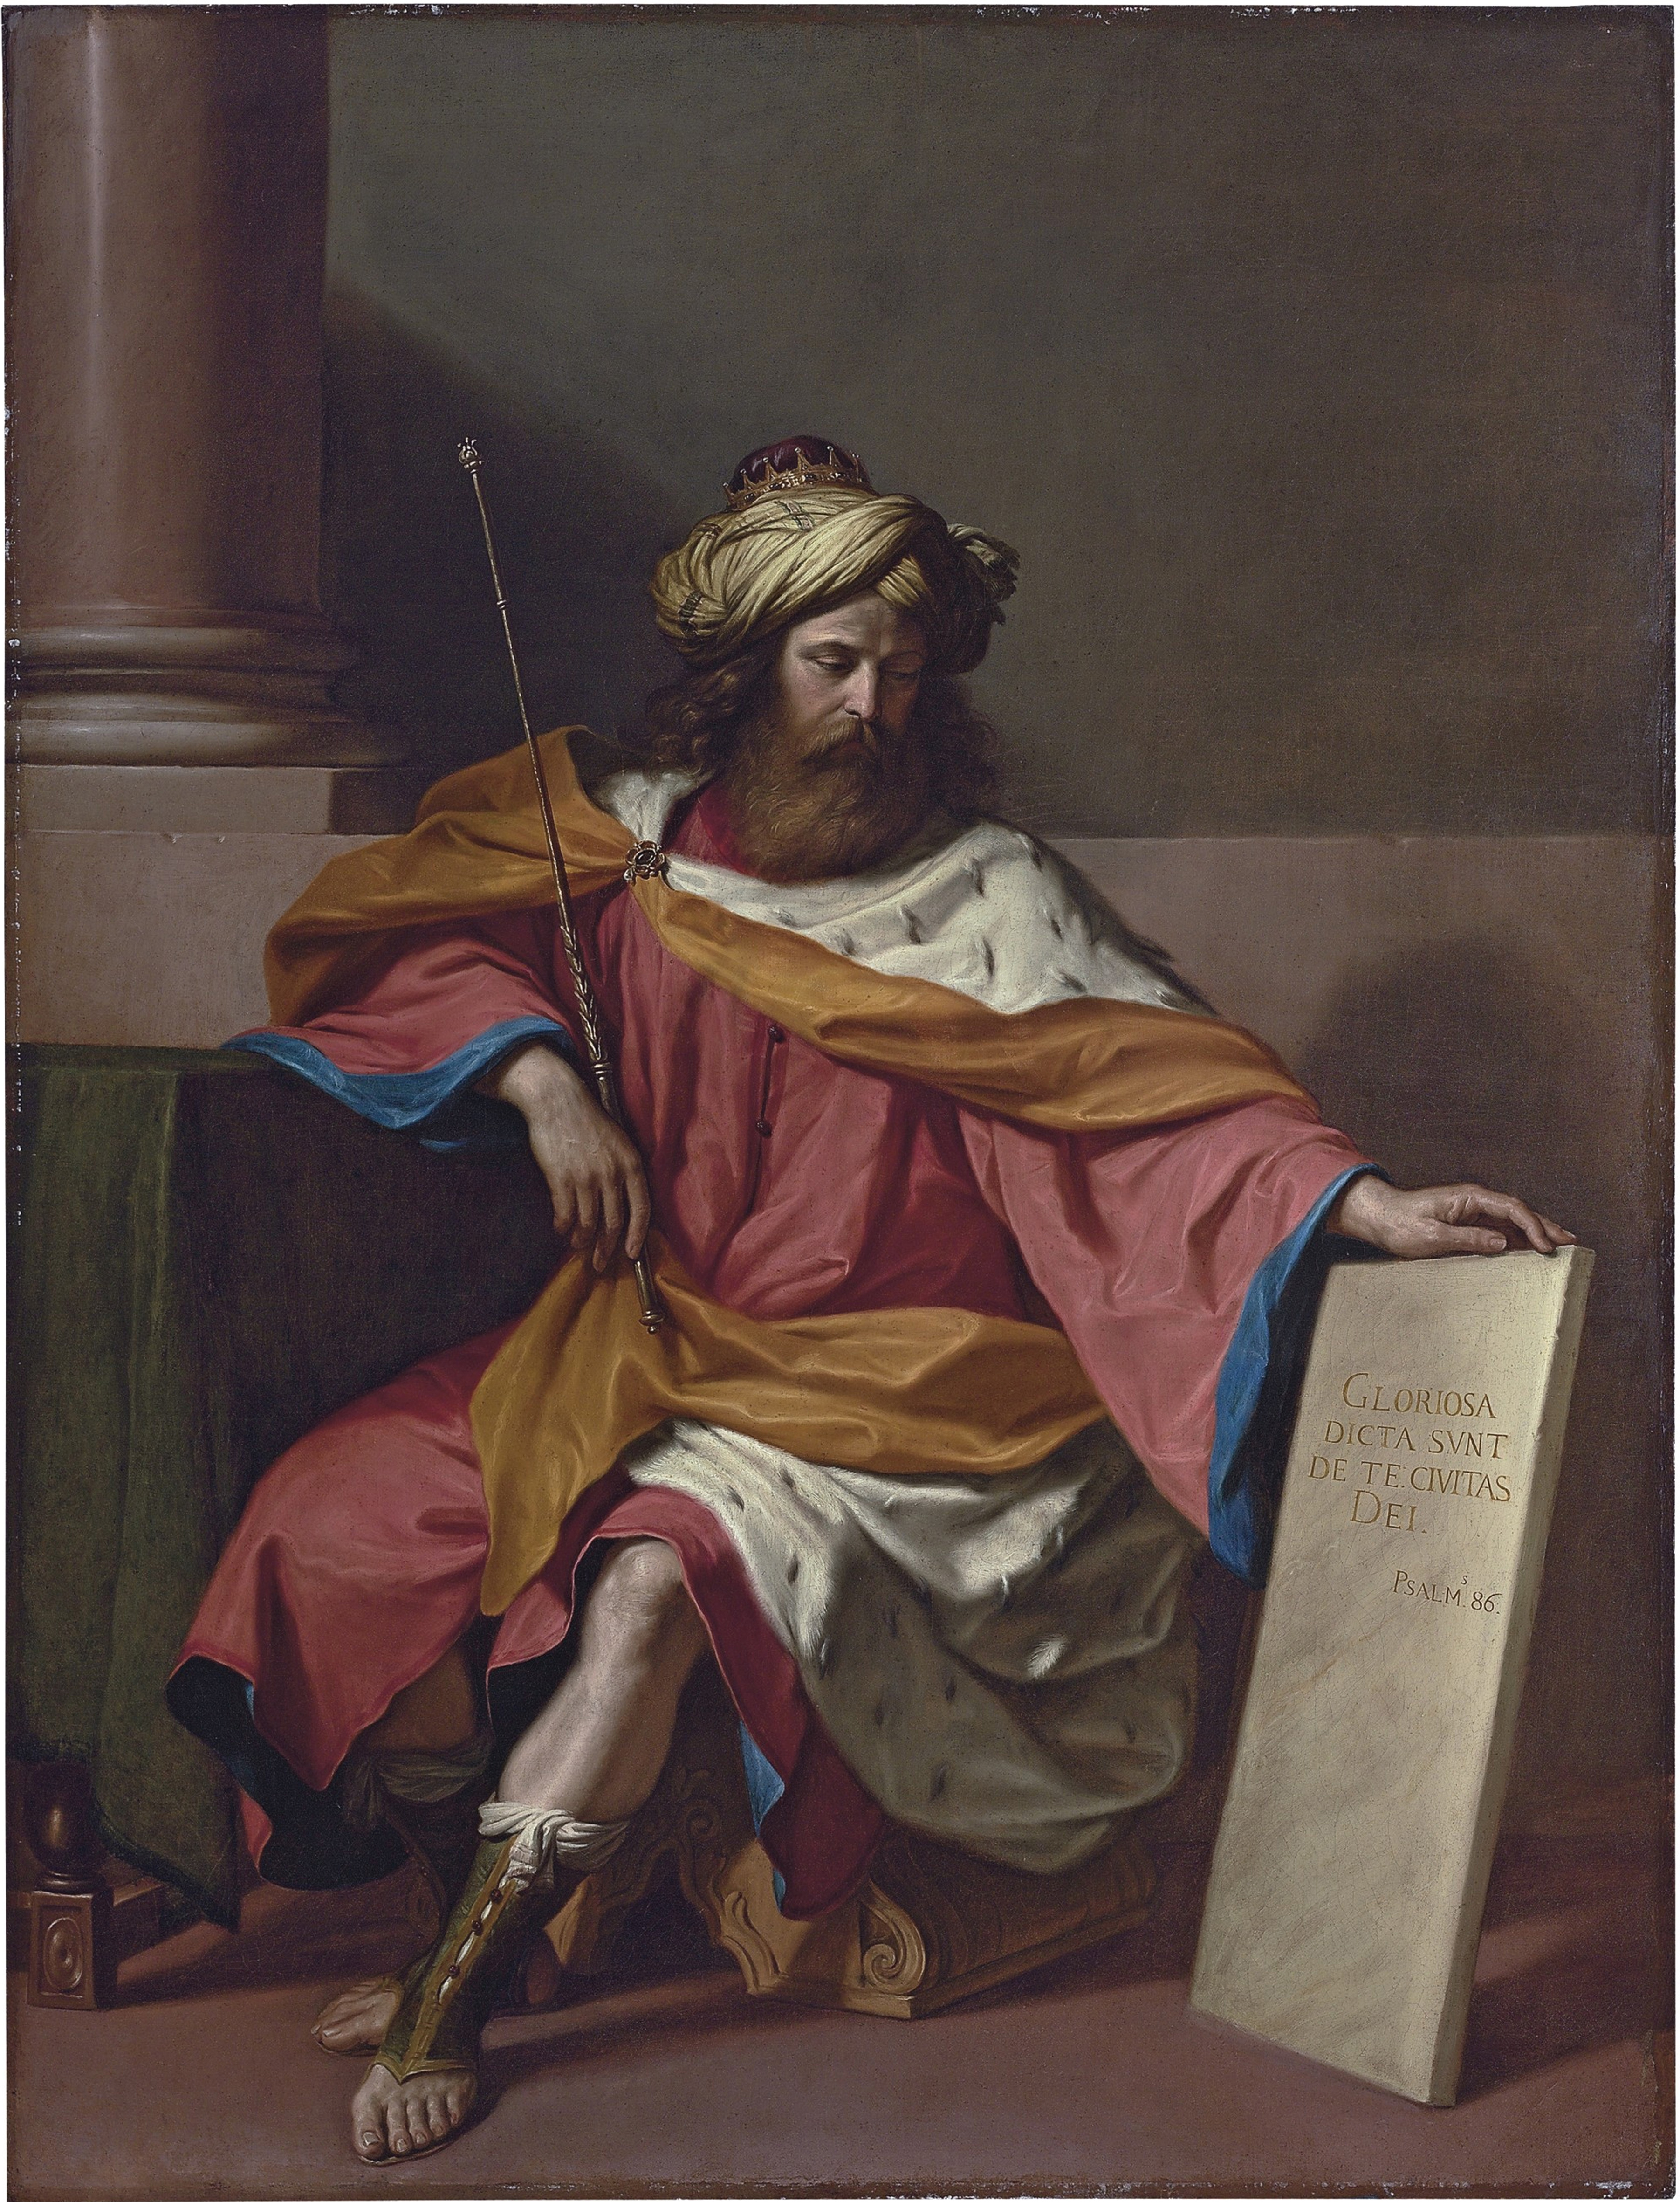 King David. Artist: Guercino (1591-1666) (Heritage Images/Getty Images)